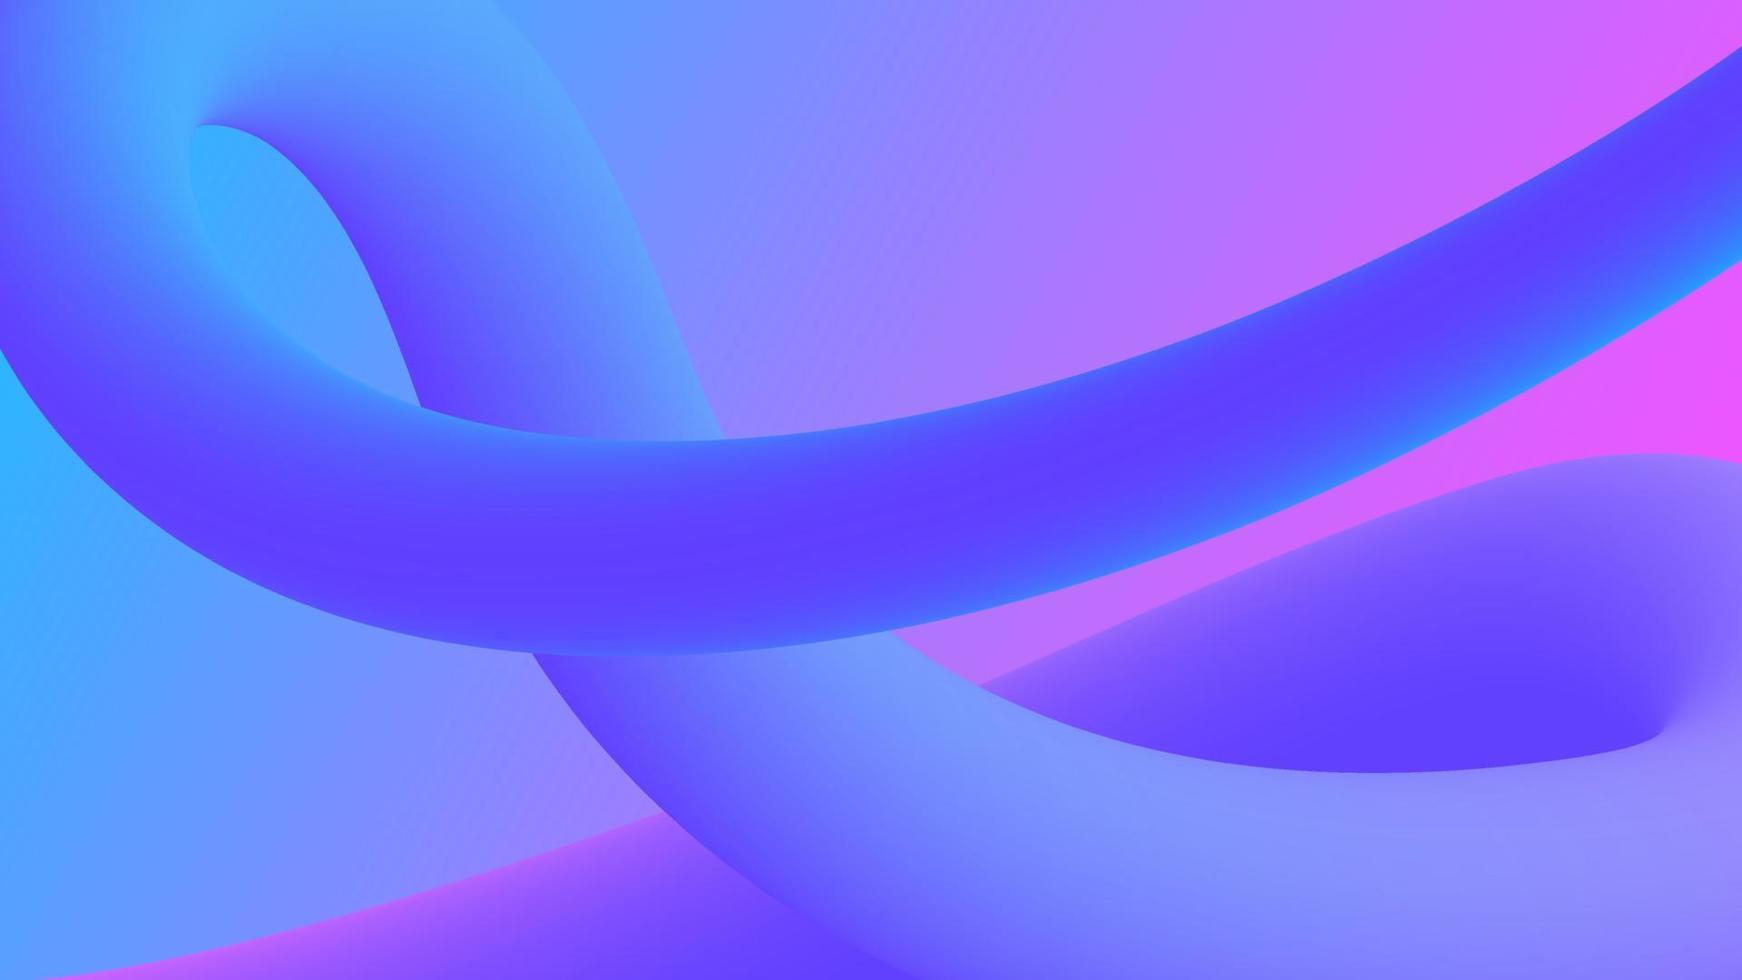 A purple and blue abstract design - 3D